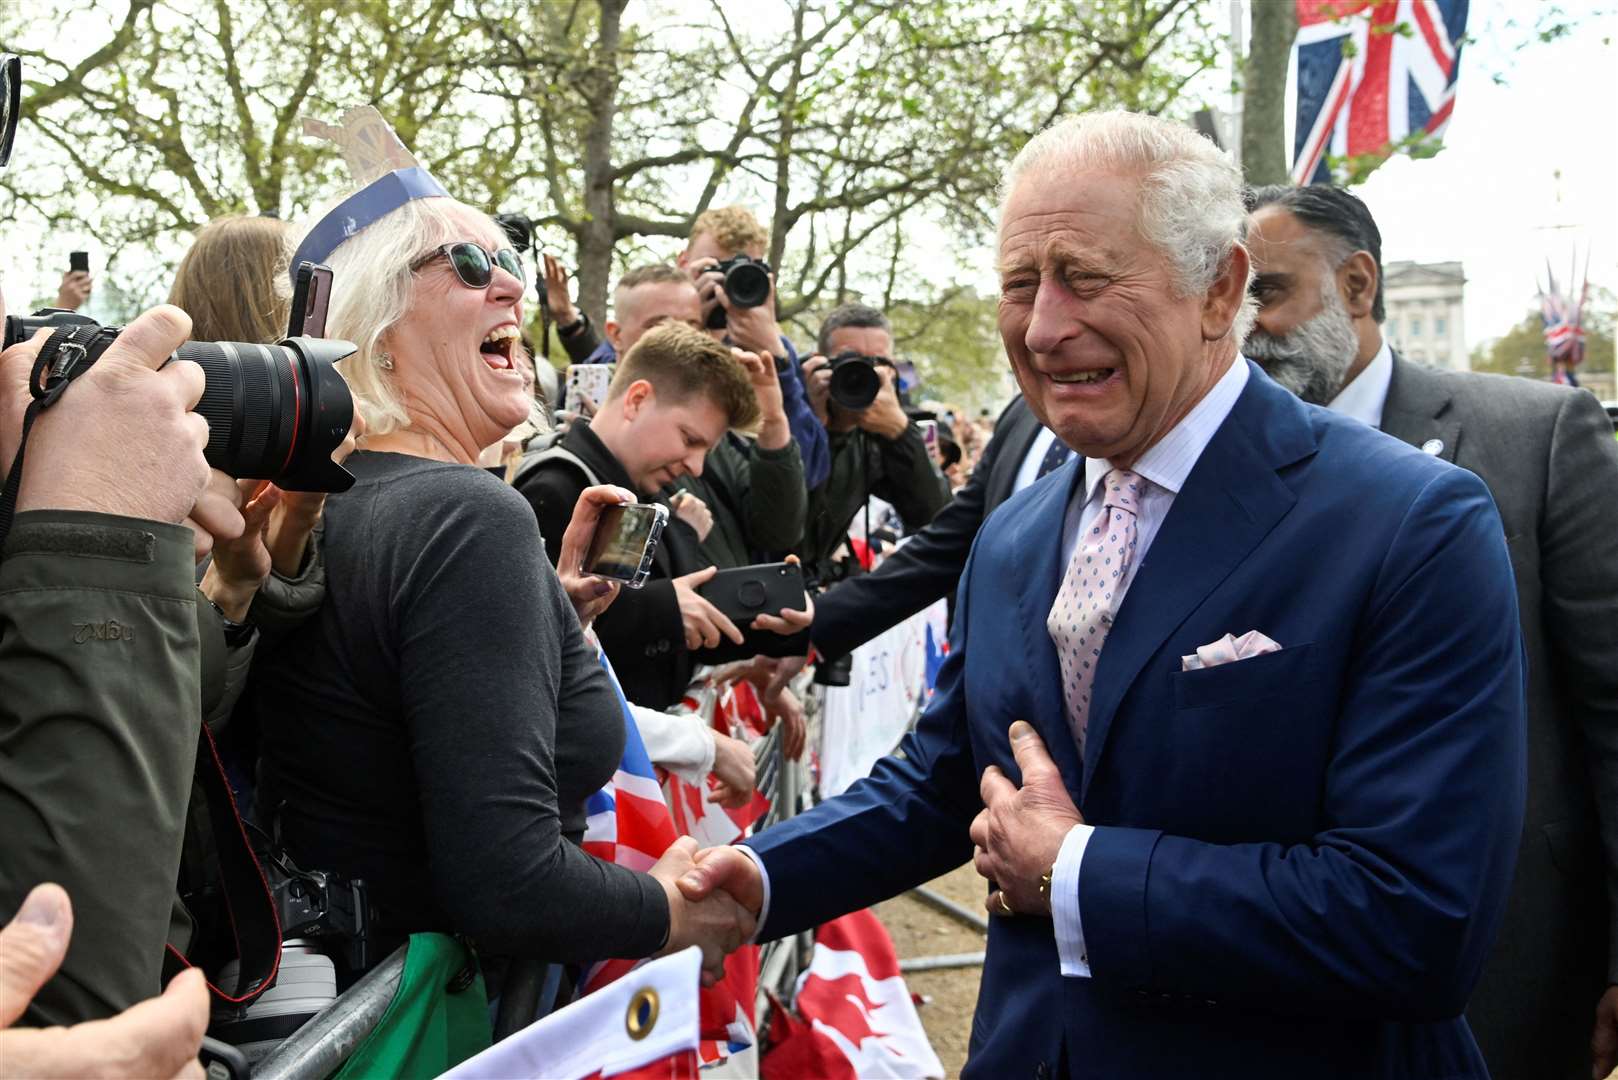 The King jokes with a well-wisher in The Mall (Toby Melville/PA)